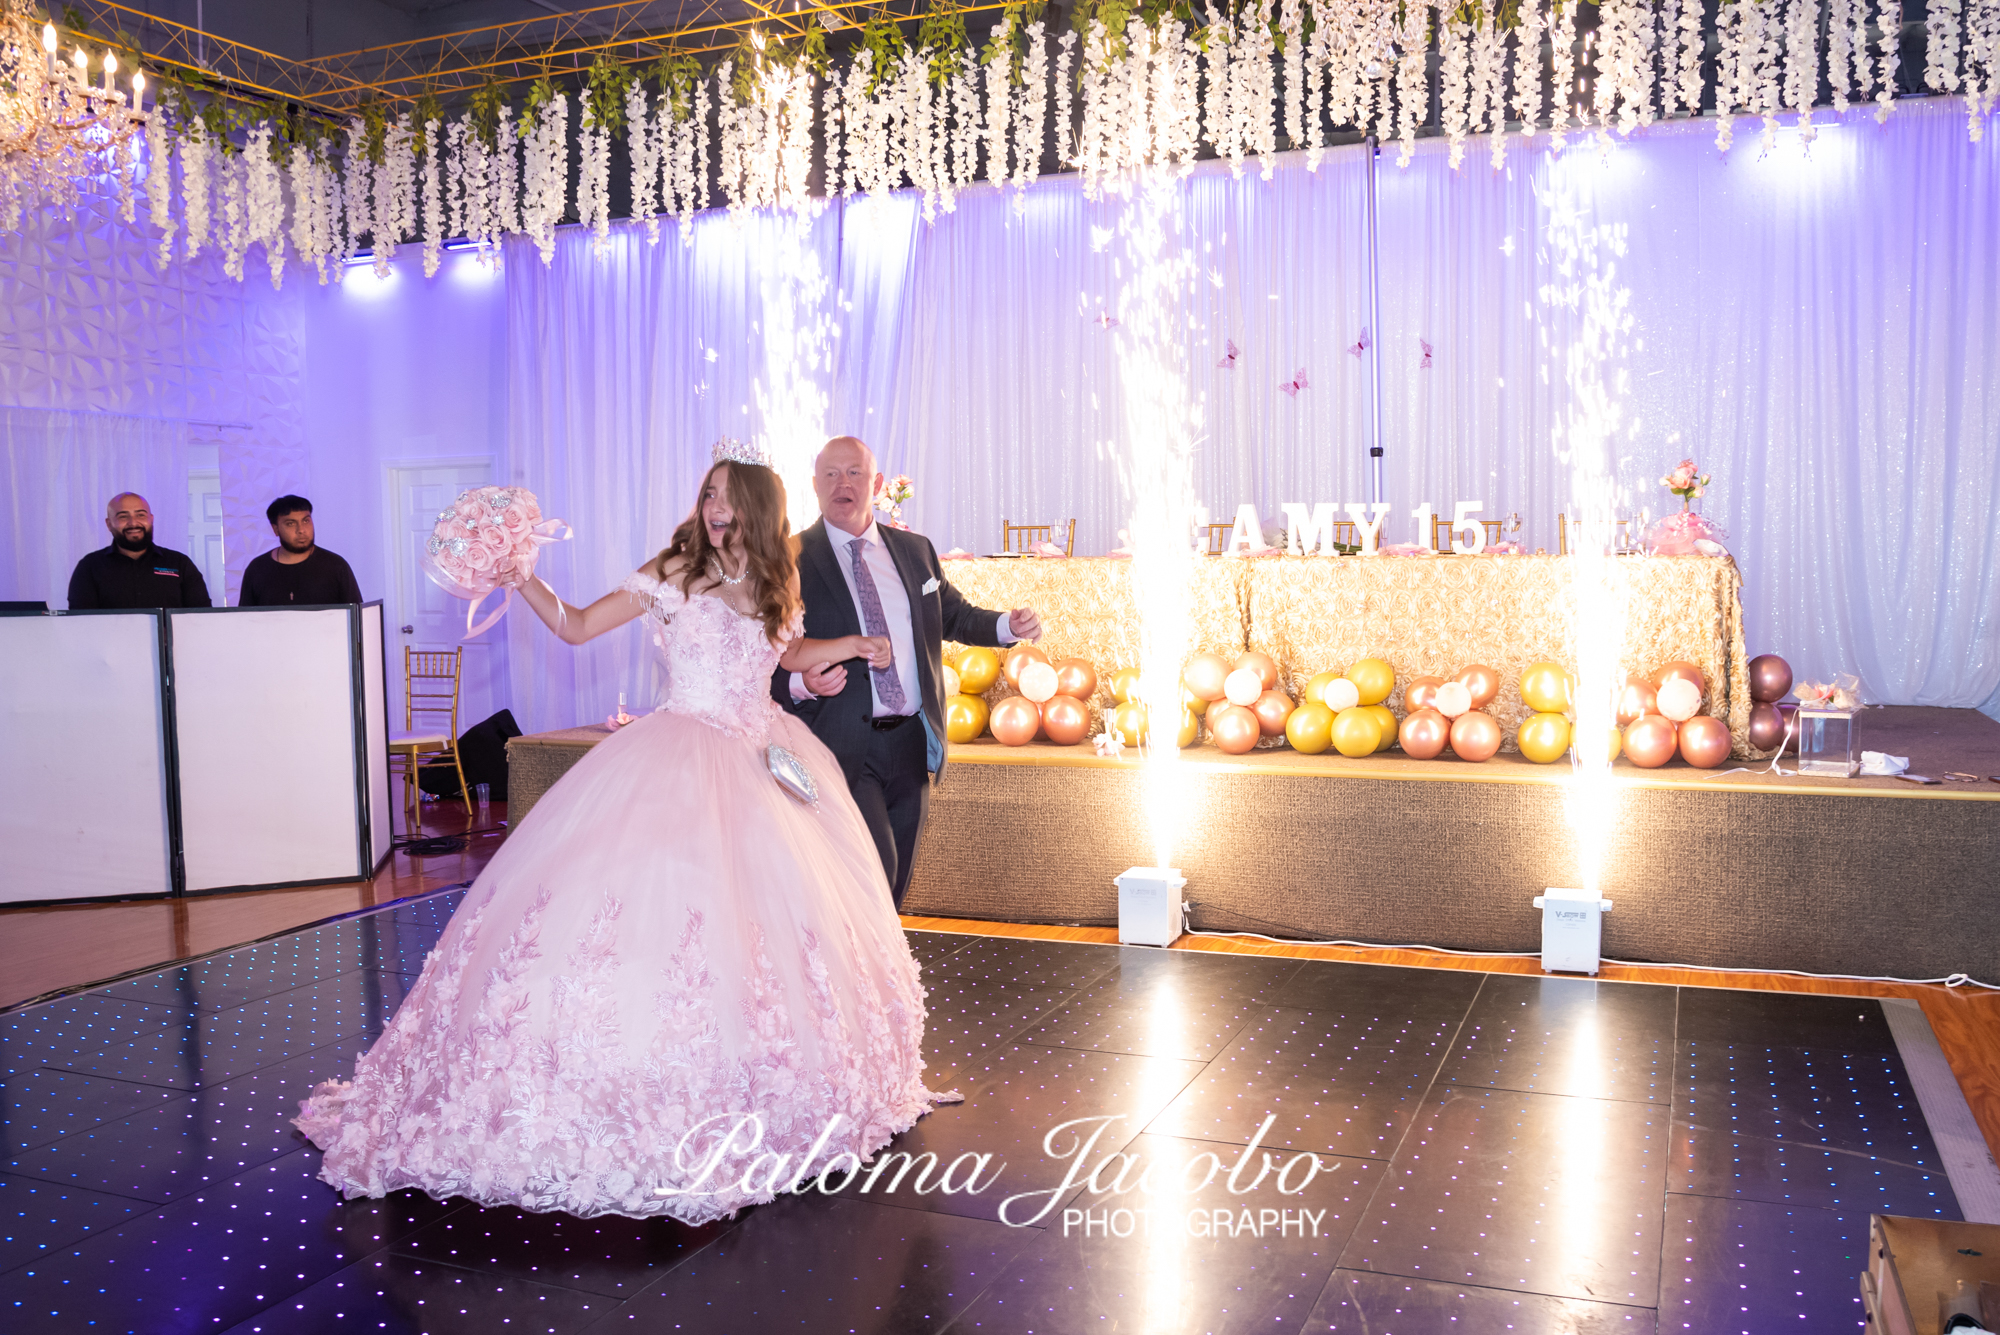 Quinceanera dancing with dad at Royal Banquet Hall by Paloma Jacobo Photography